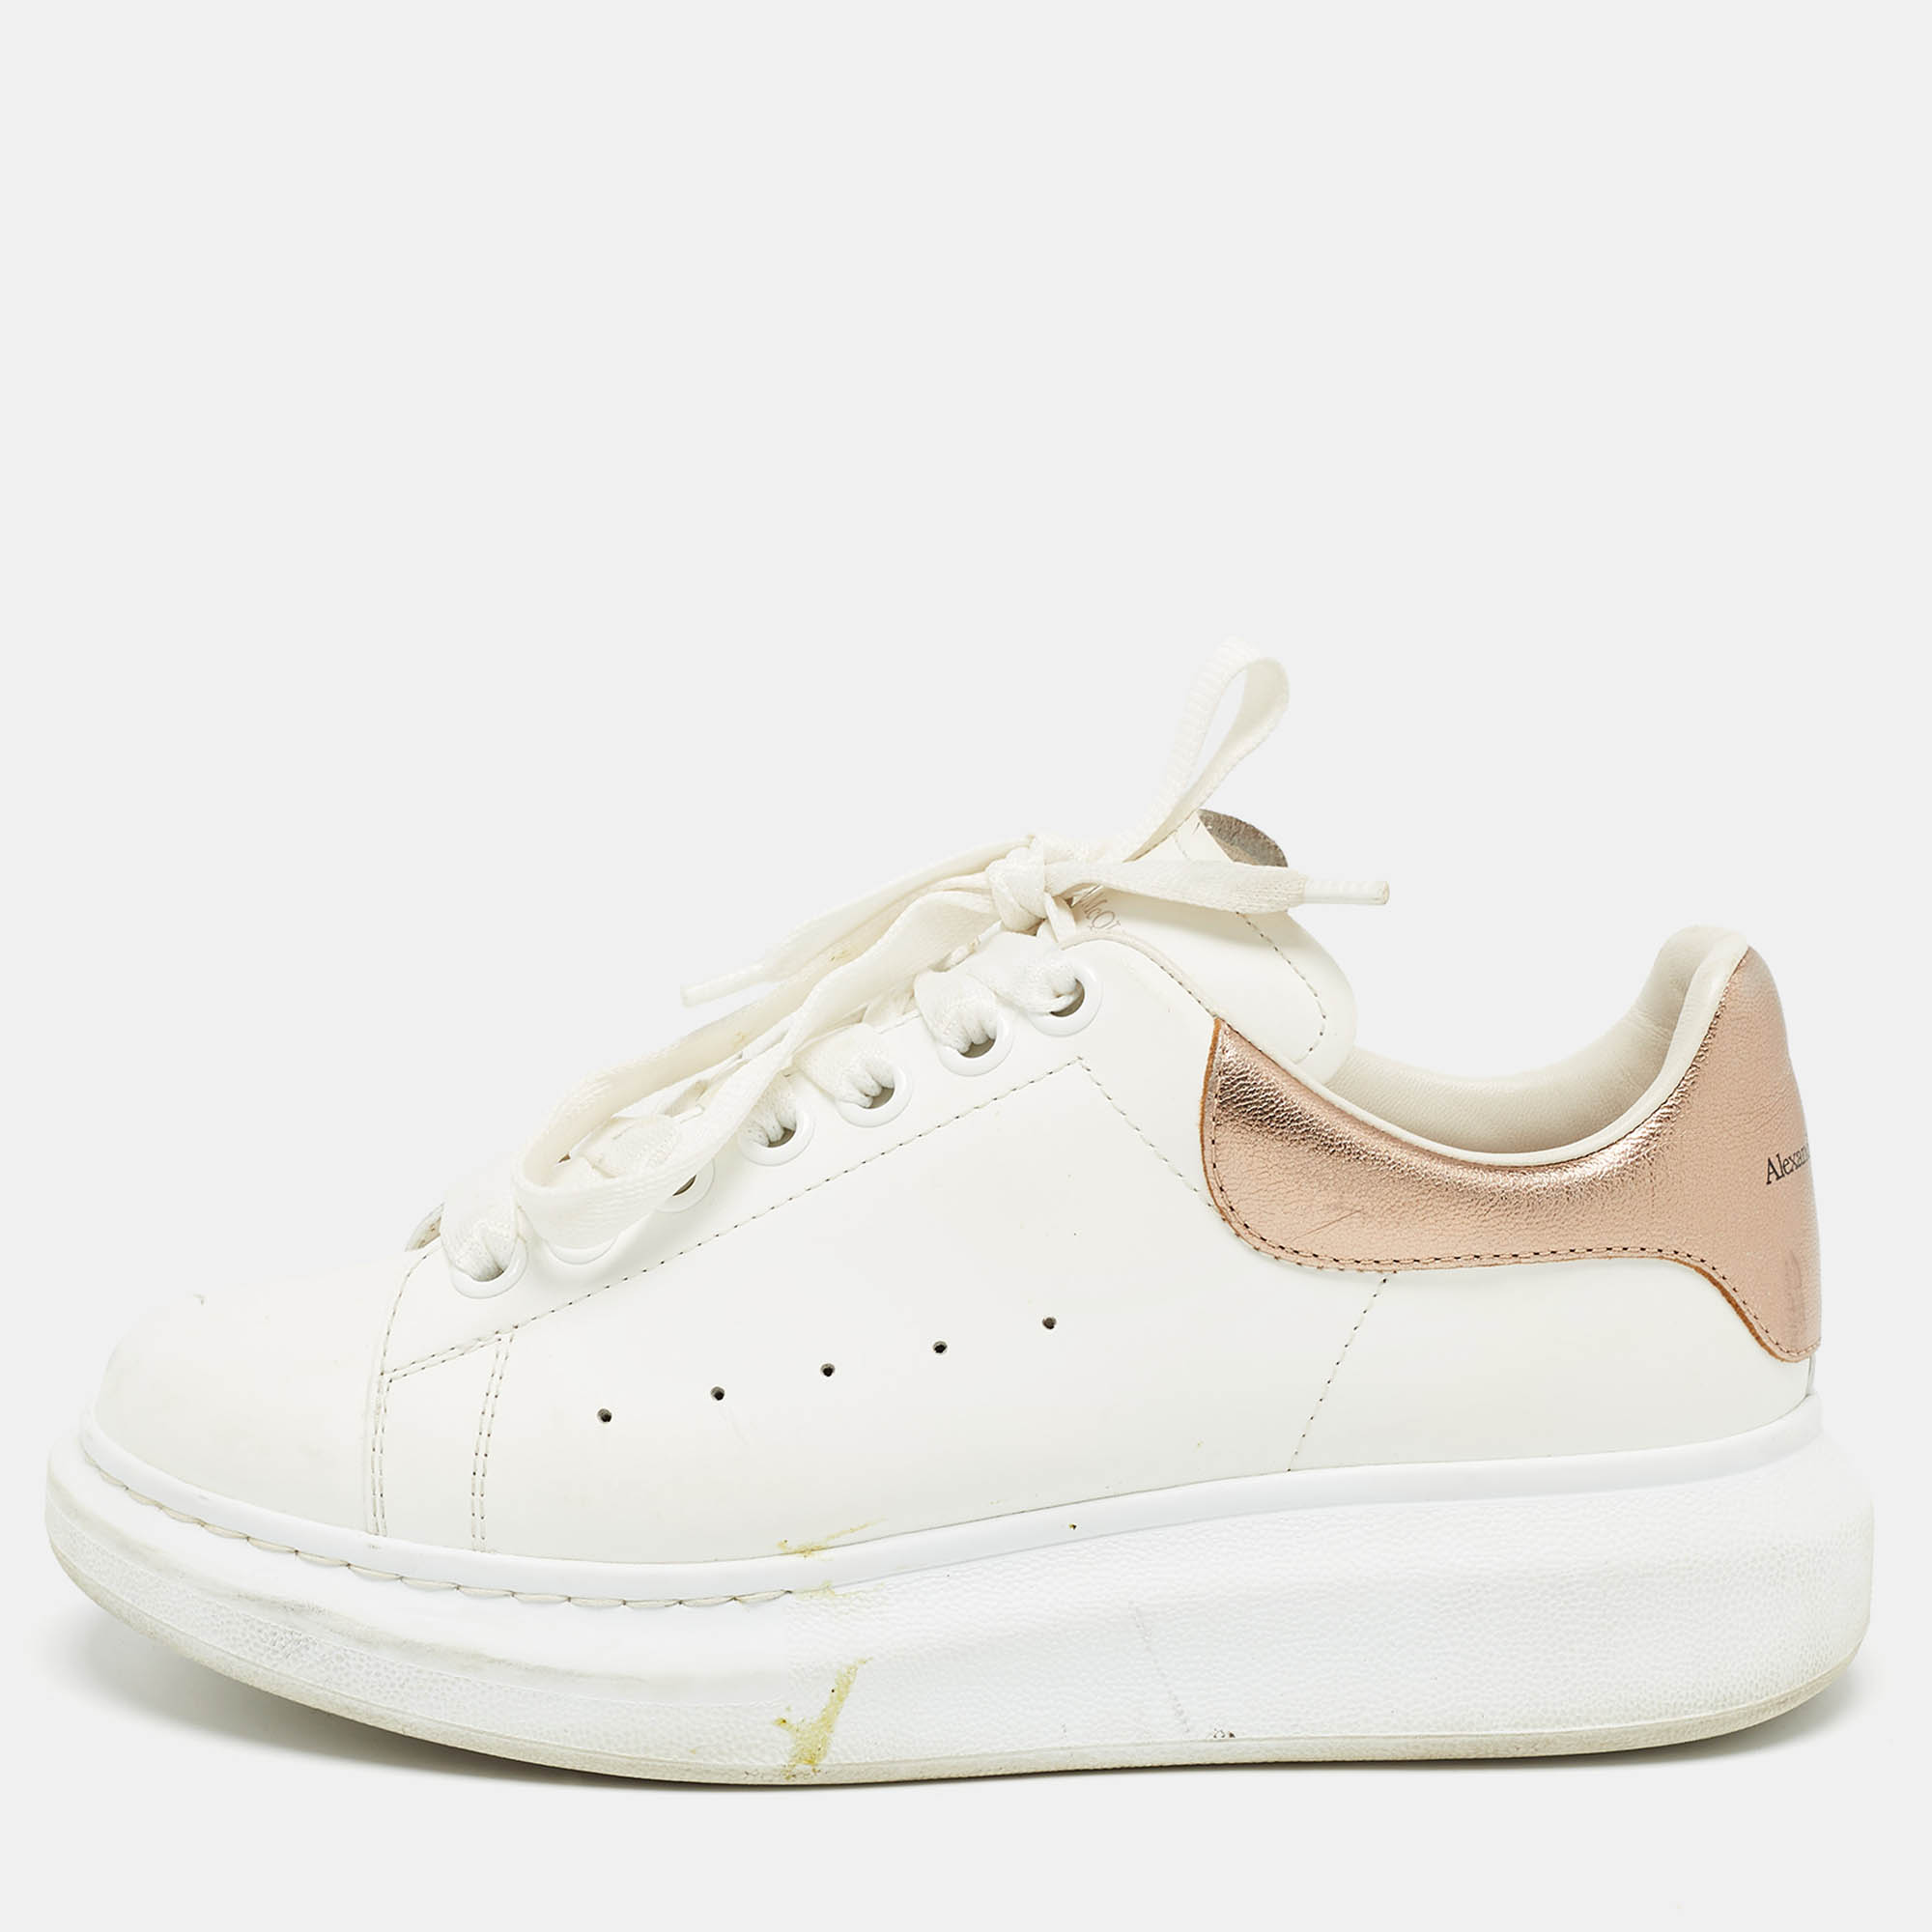 Pre-owned Alexander Mcqueen White Leather Oversized Sneakers Size 38